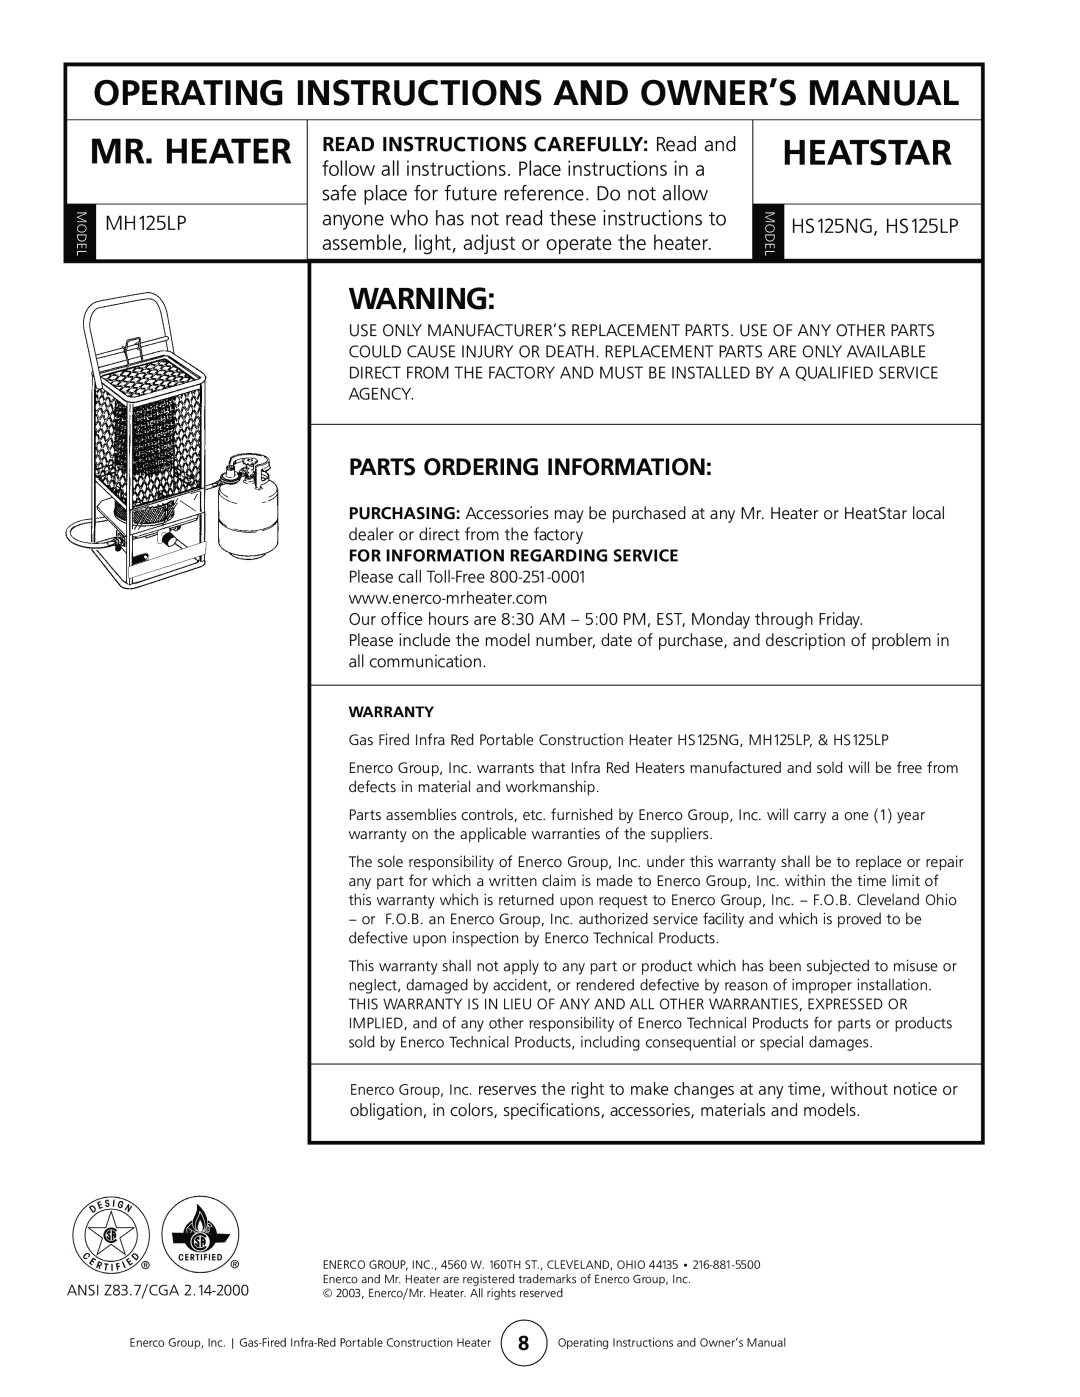 Gas-Fired Products HS125LP Parts Ordering Information, Operating Instructions And Owner’S Manual, Mr. Heater, Heatstar 